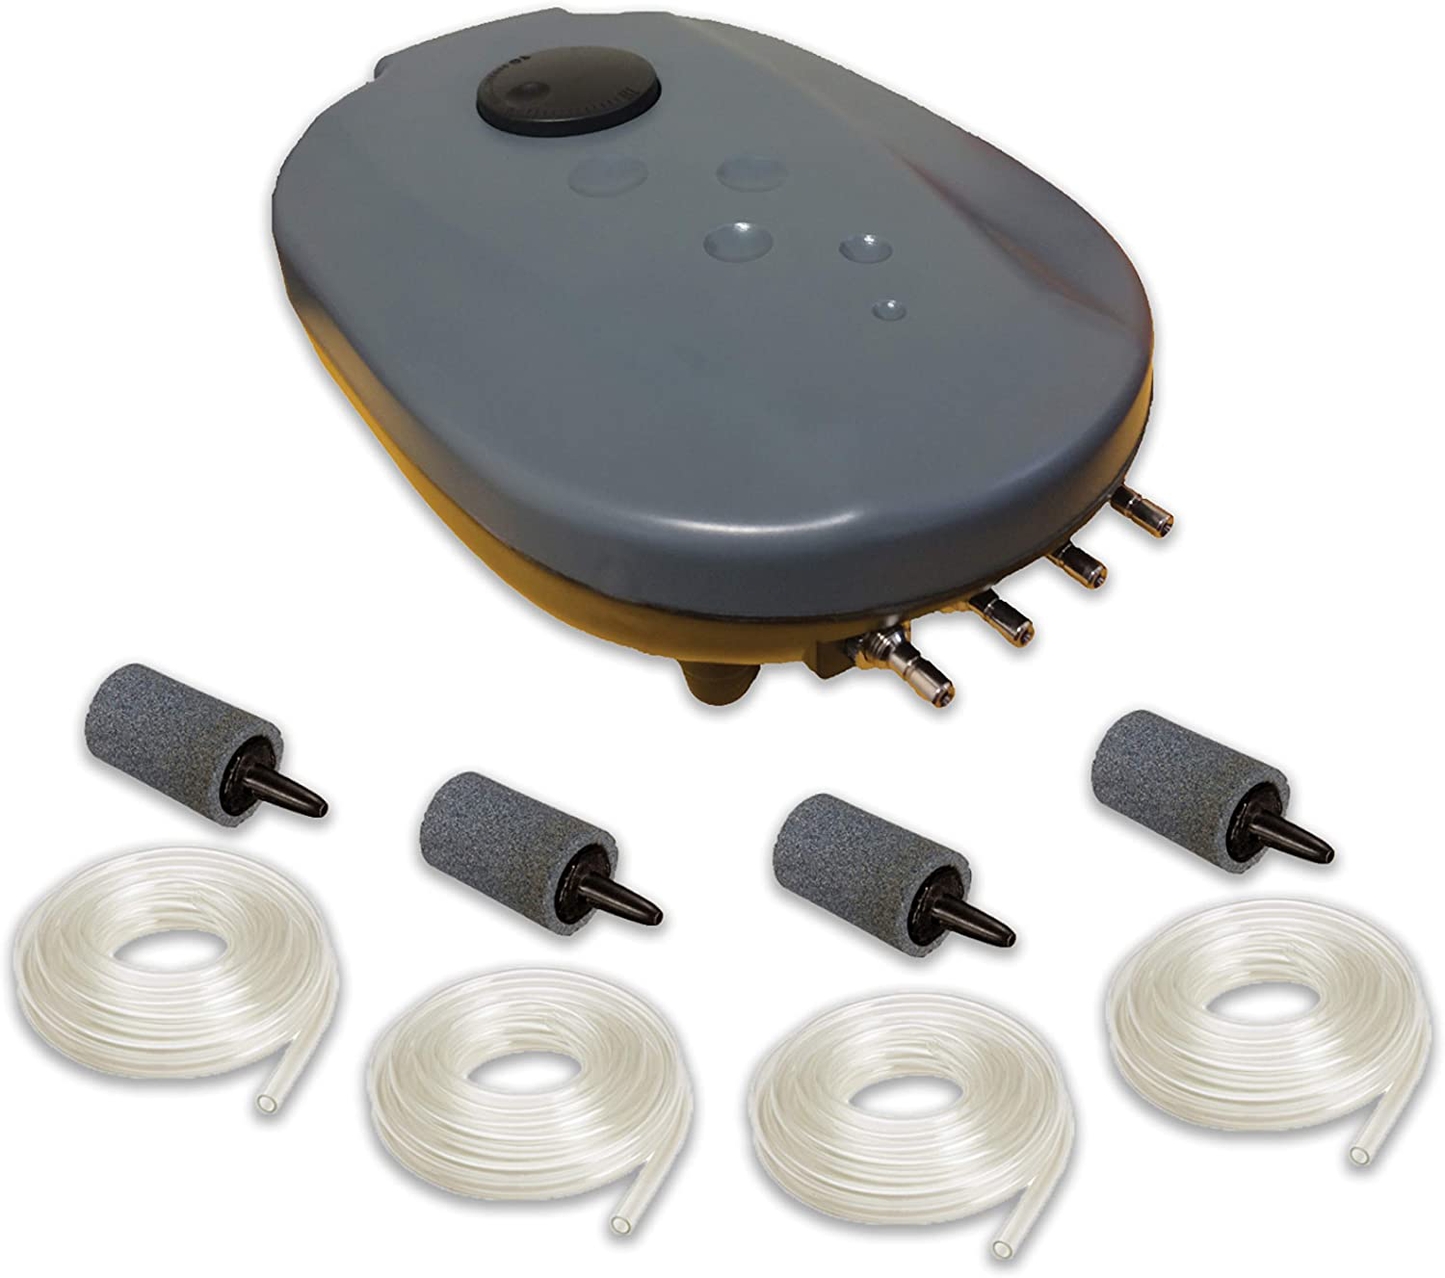 HALF off PONDS Patriot Pond 0.45 Cubic Feet per Minute Air Pump for Aquariums, Tanks, and Ponds to 1,500 Gallons, Water Gardens & Fish Ponds - PA-12